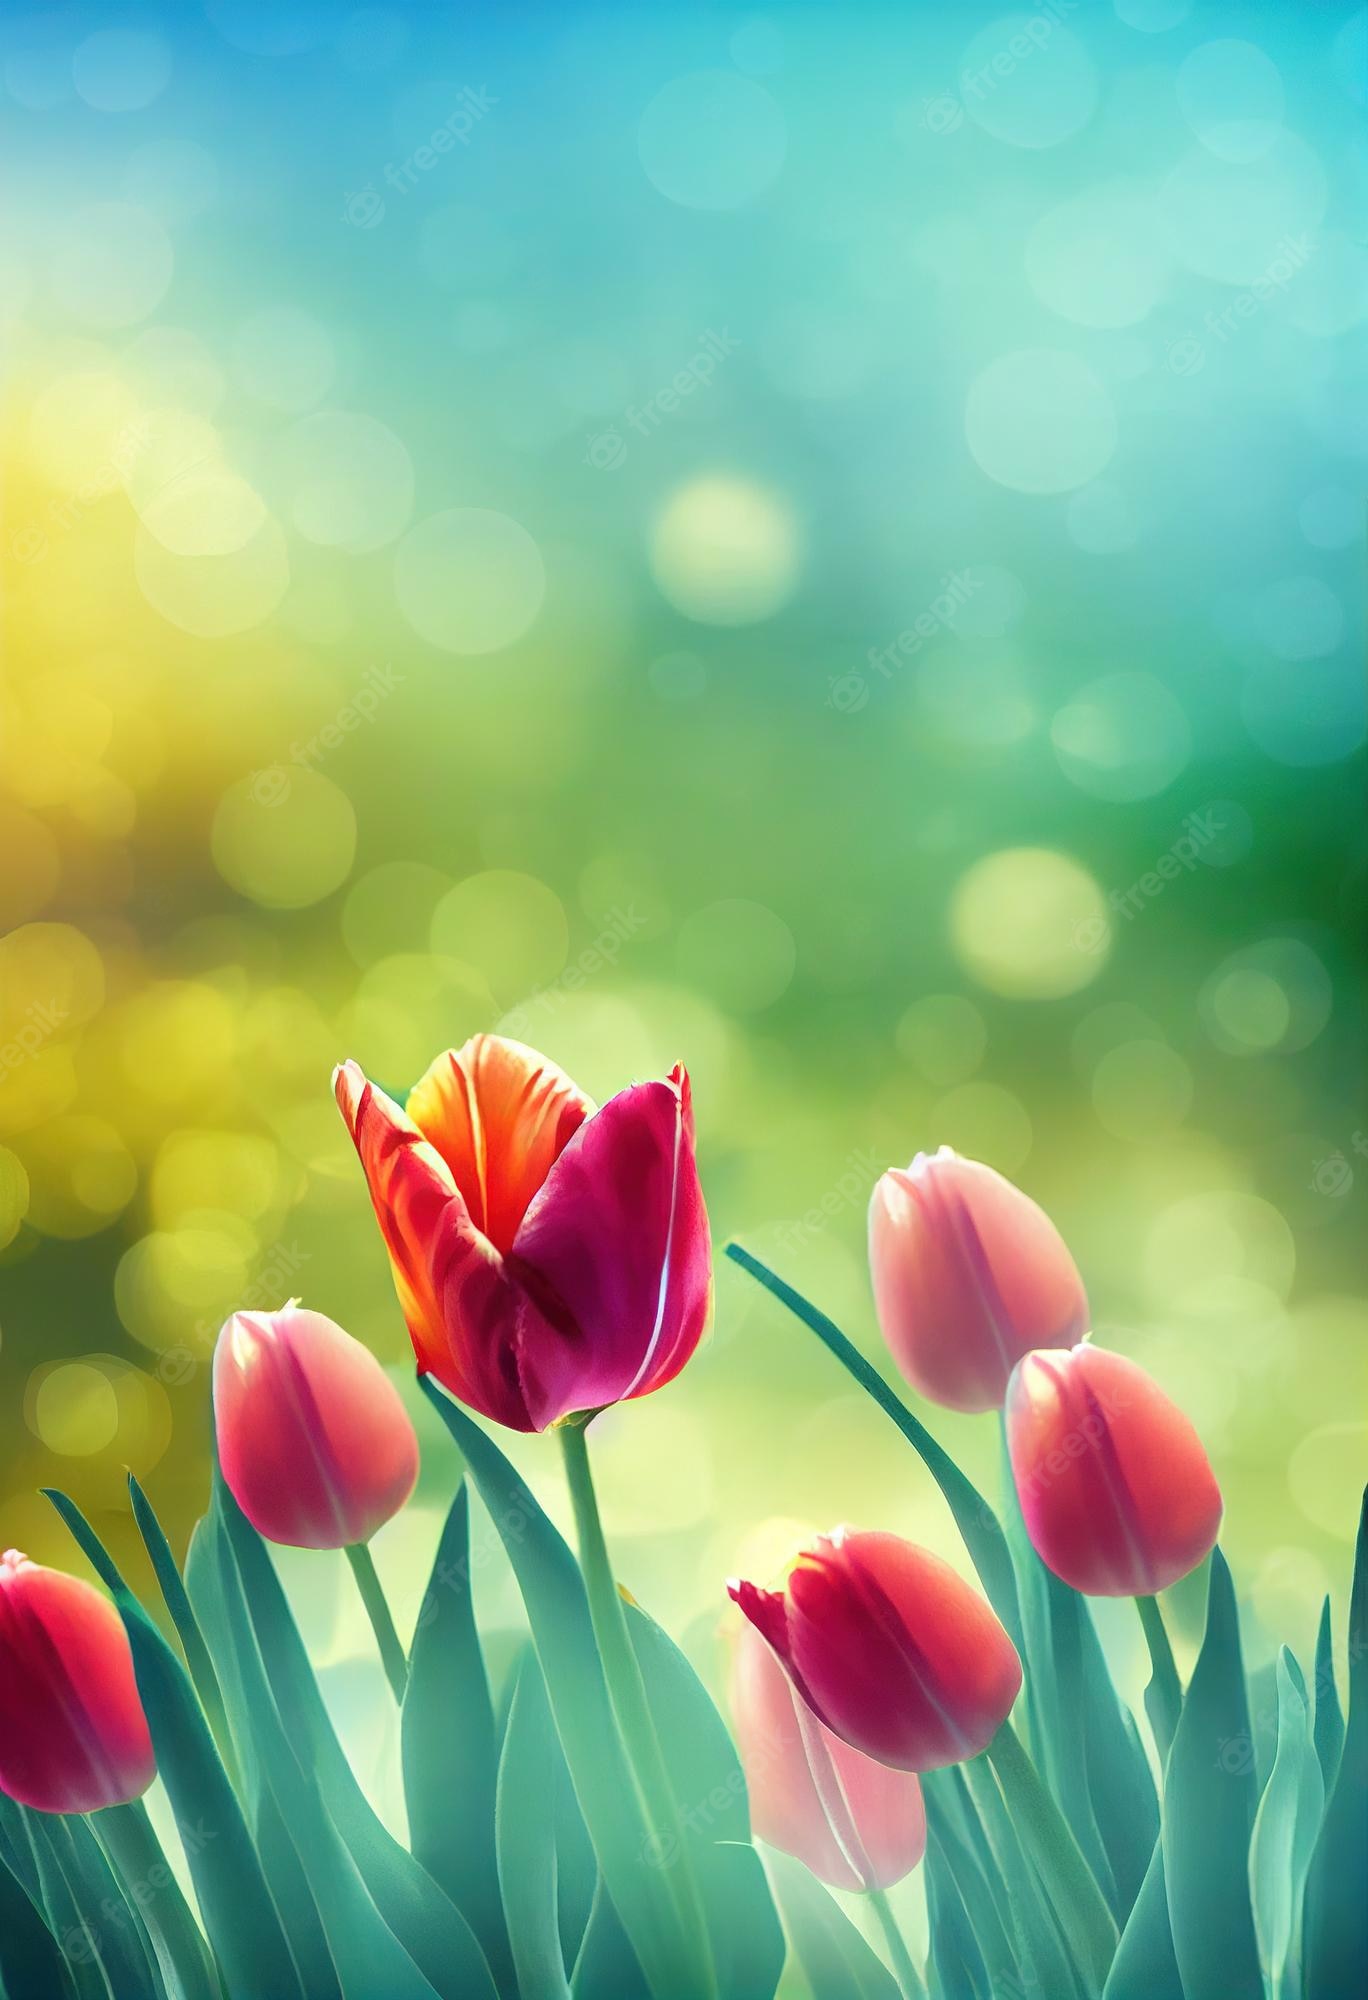 Premium Photo. Bright tulips for colorful beautiful colors wallpaper flowers